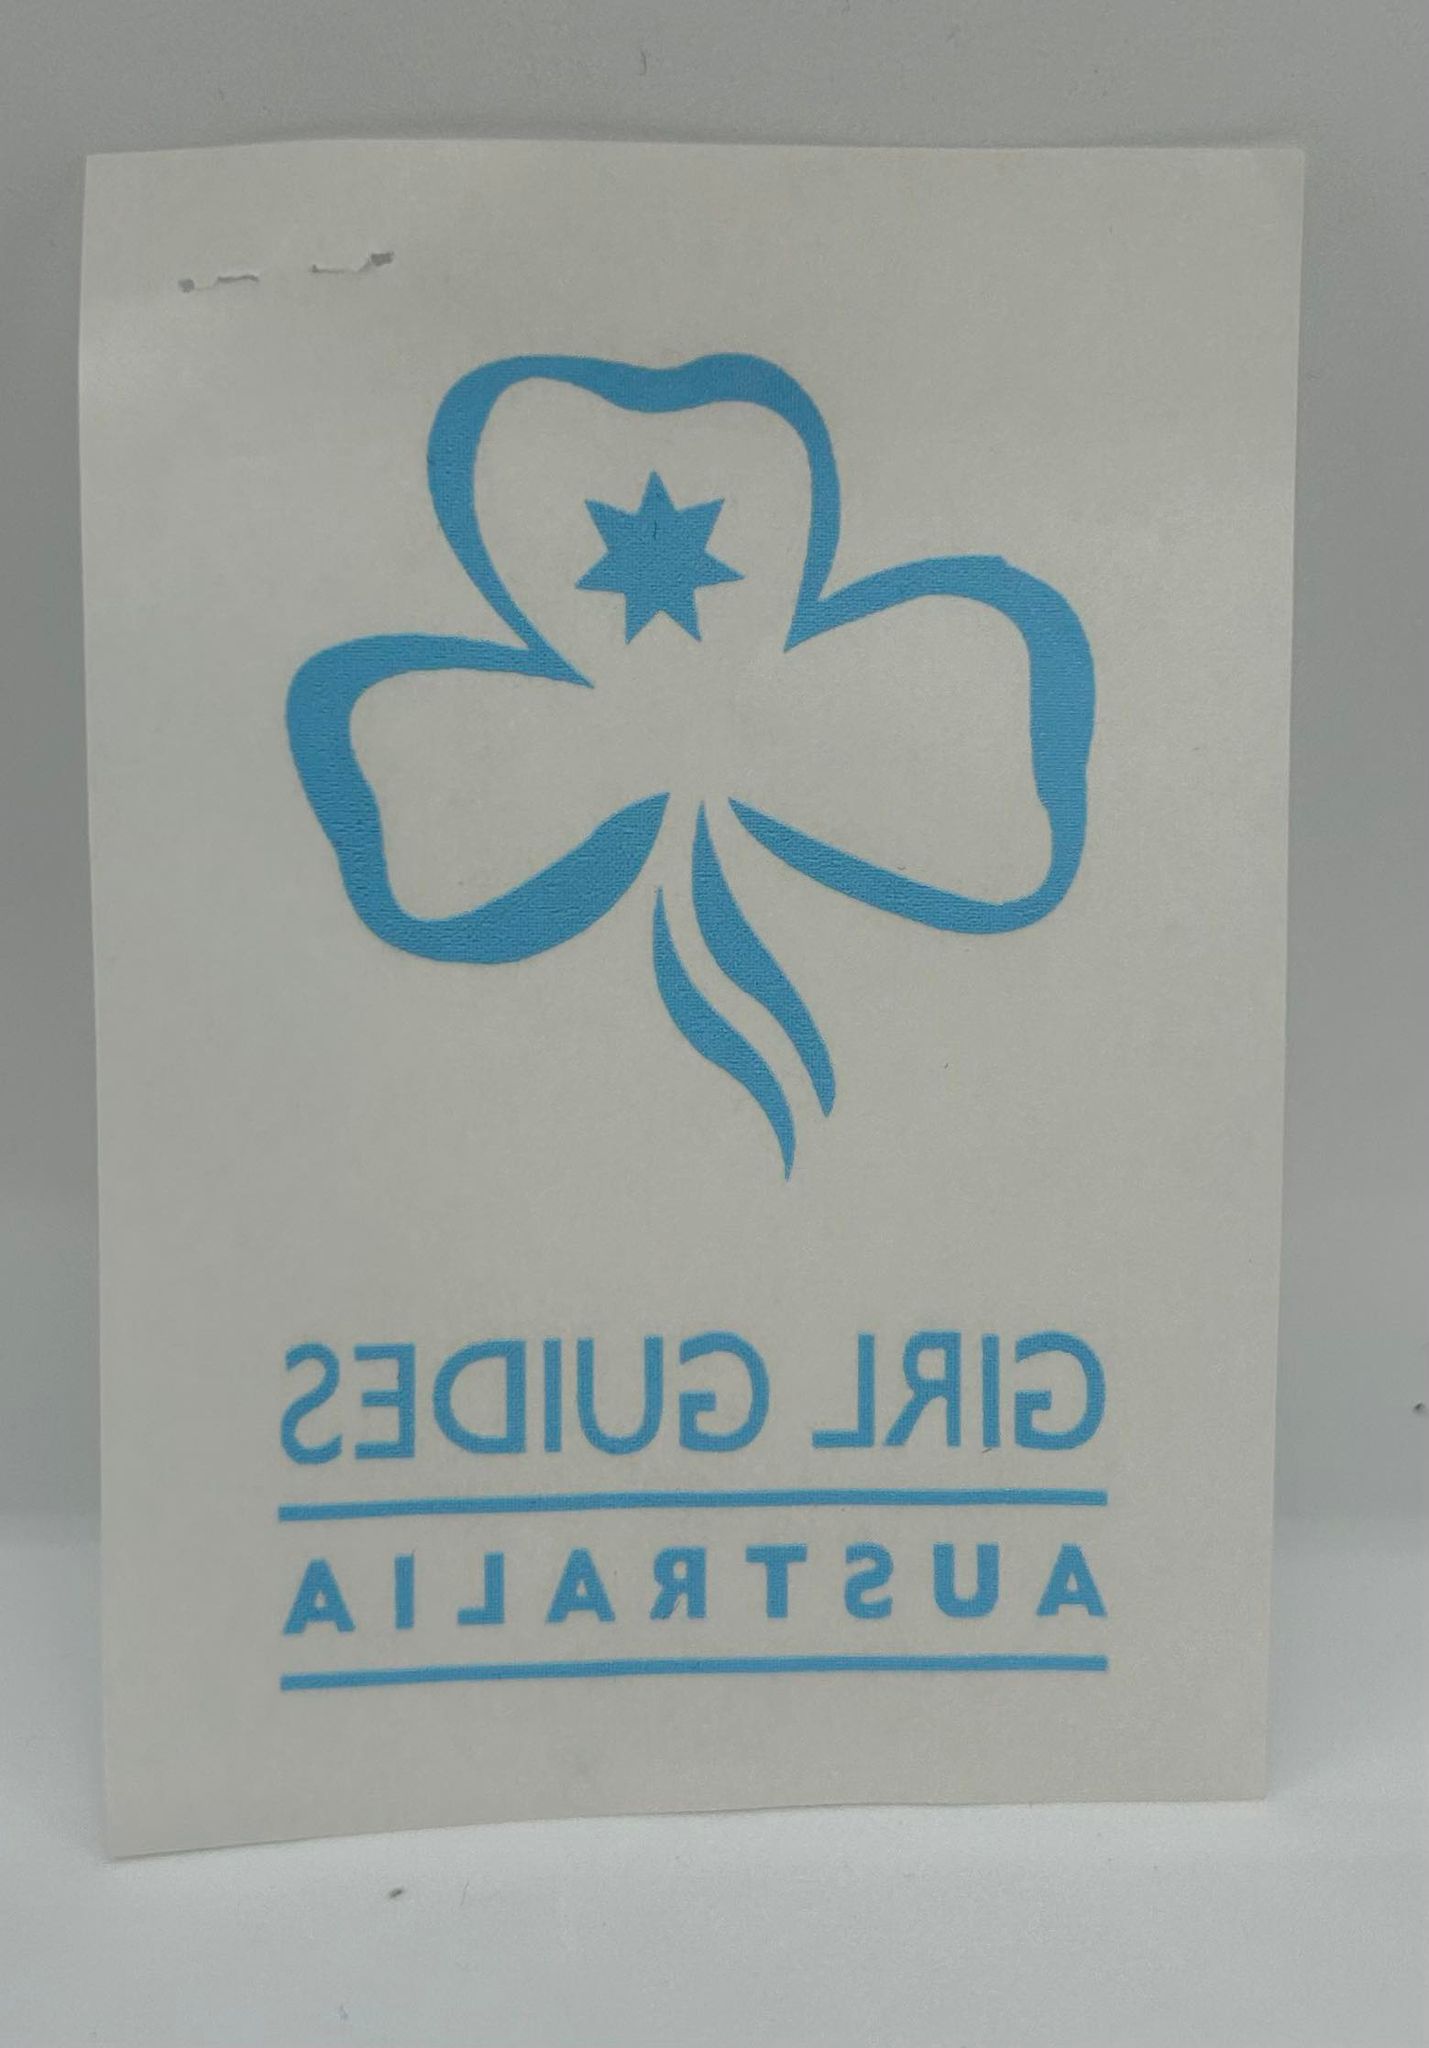 an iron on trefoil with girl guides Australia written underneath